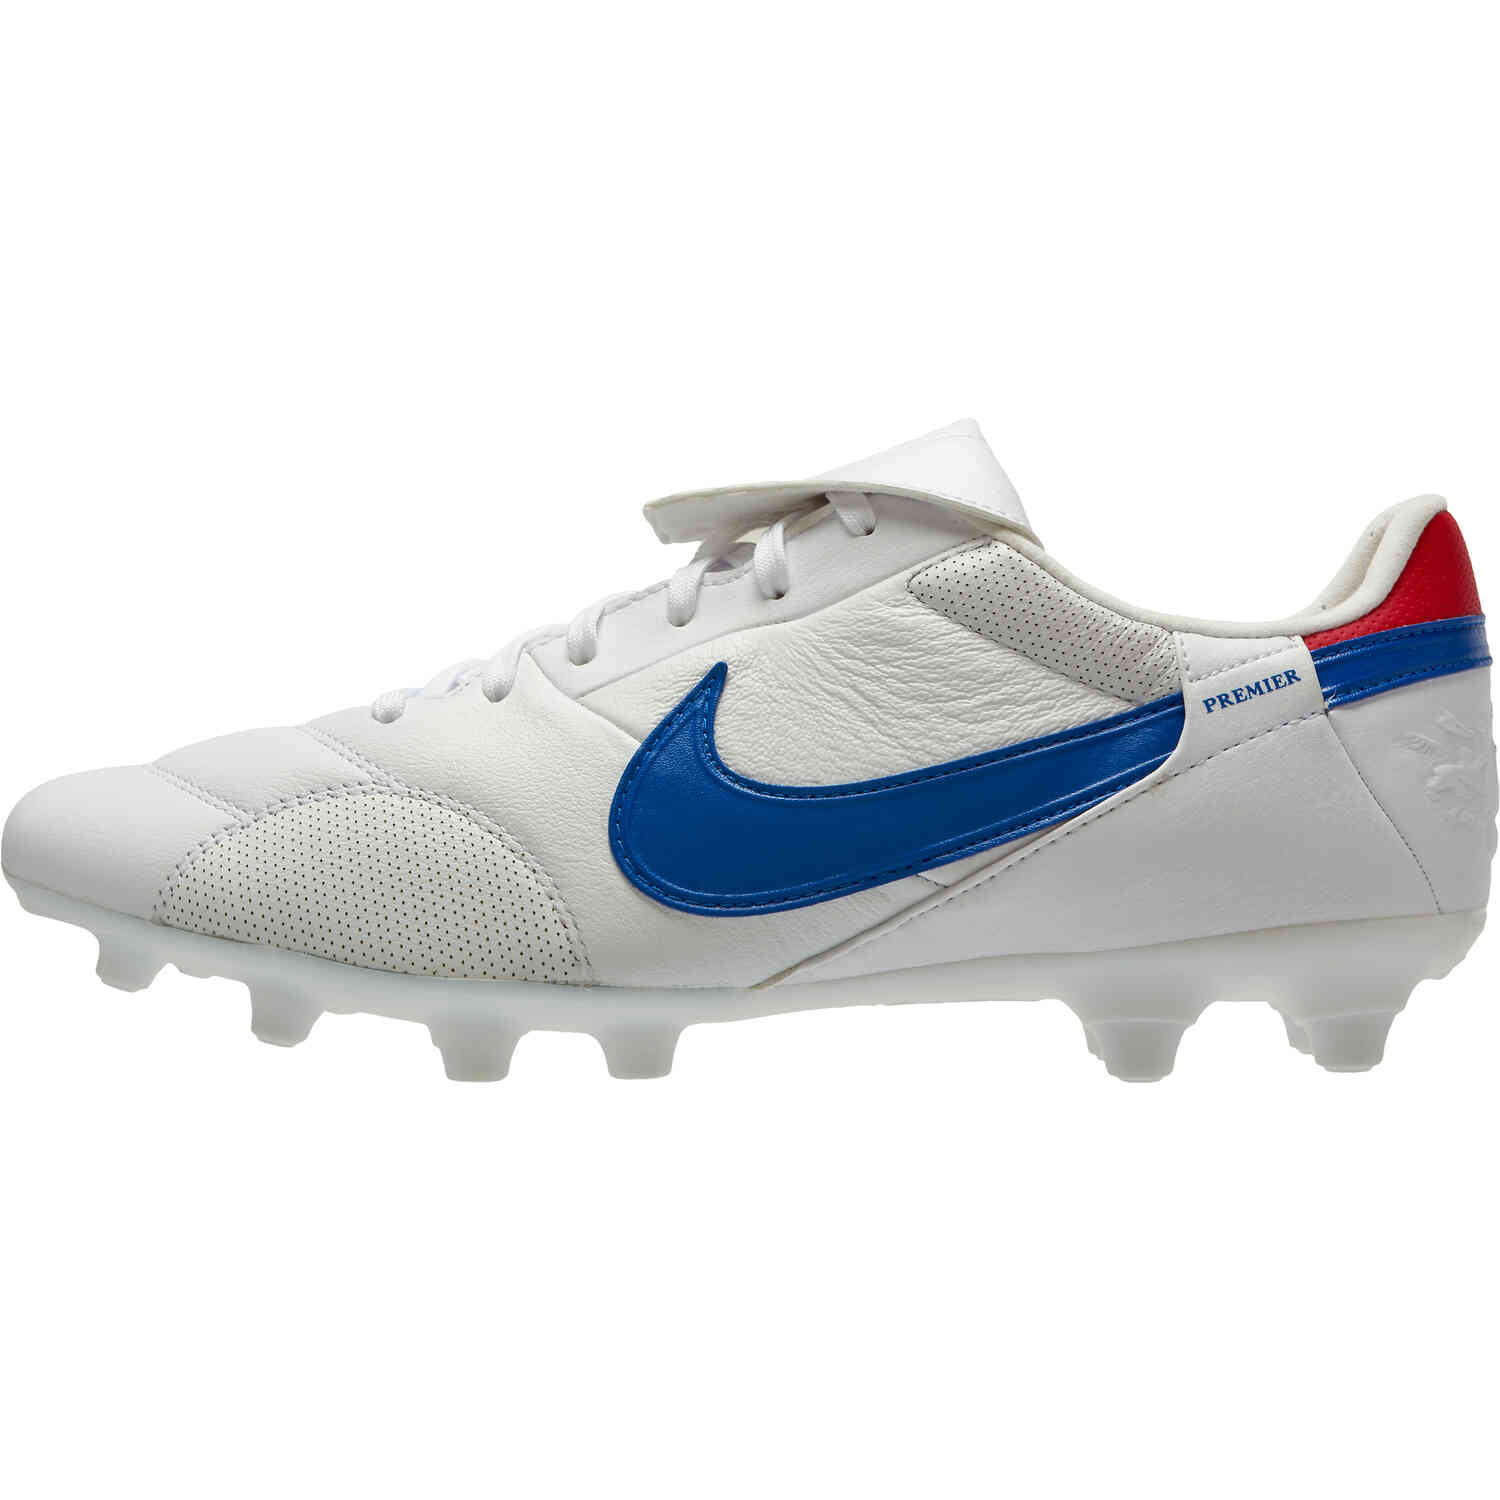 Nike III FG Firm Ground Soccer Cleats - White, Game Royal & University Red - Soccer Master